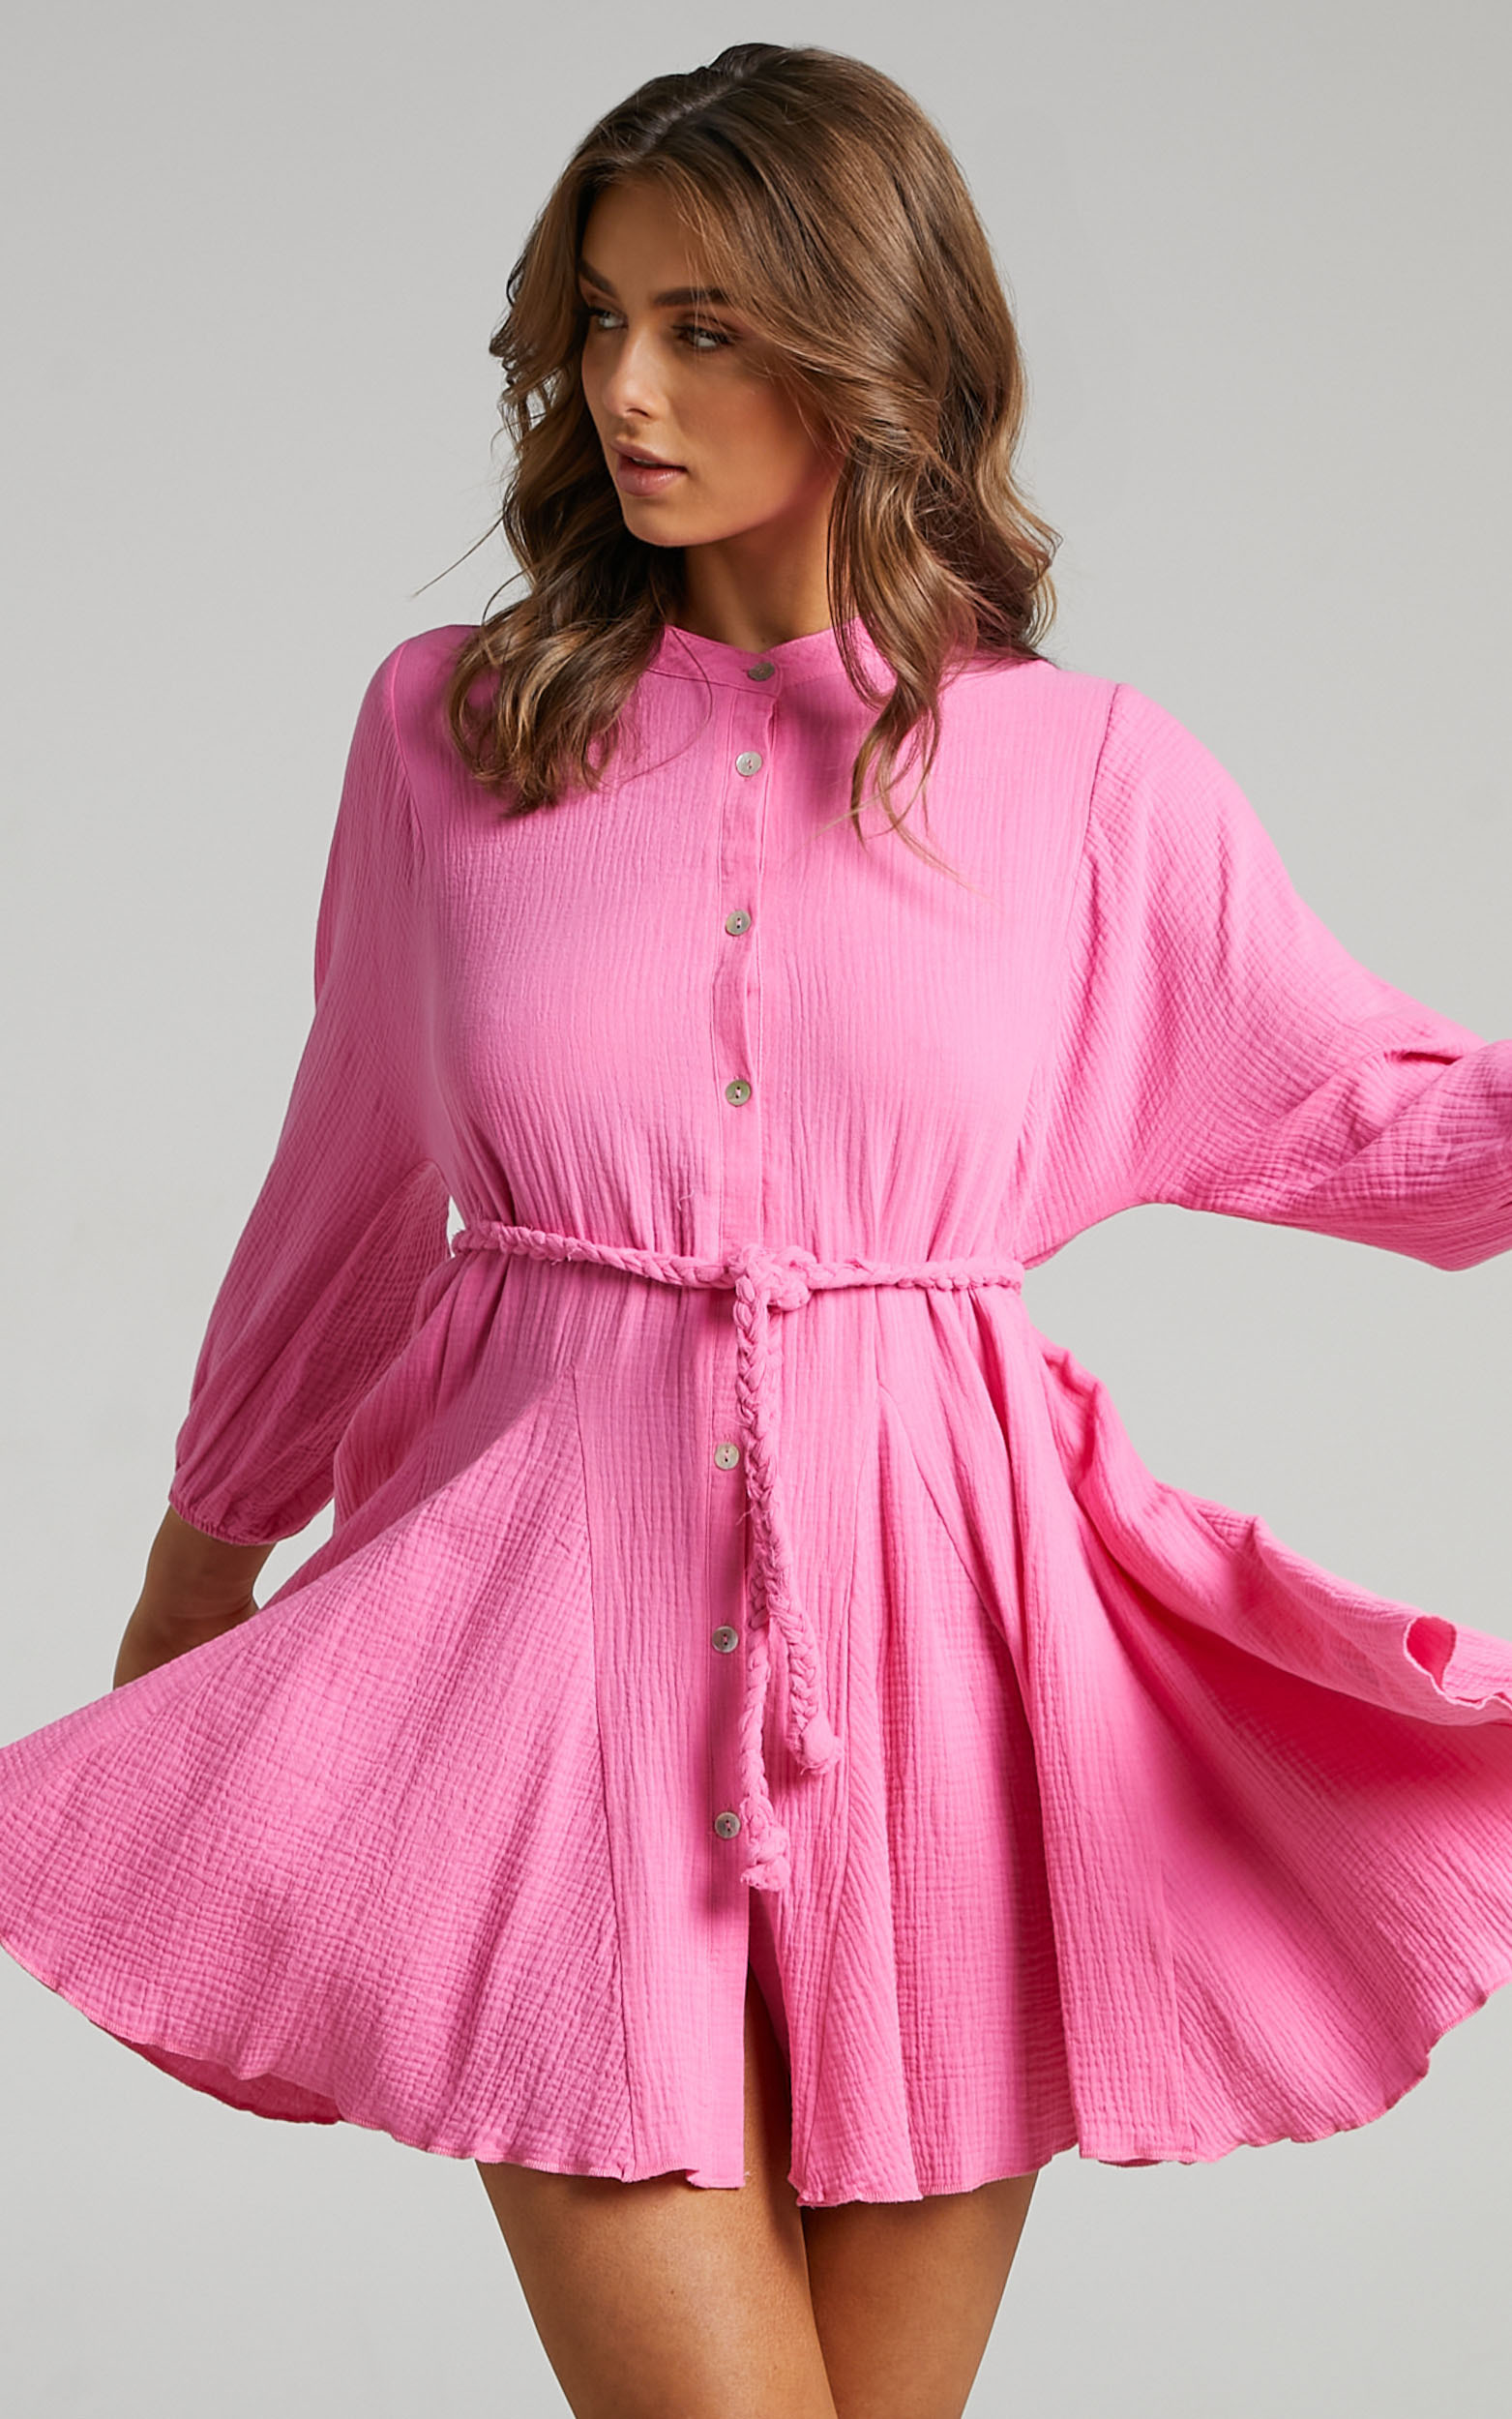 Raphaelle Long Sleeve Button Up Mini Dress in Pink - 04, PNK1, hi-res image number null